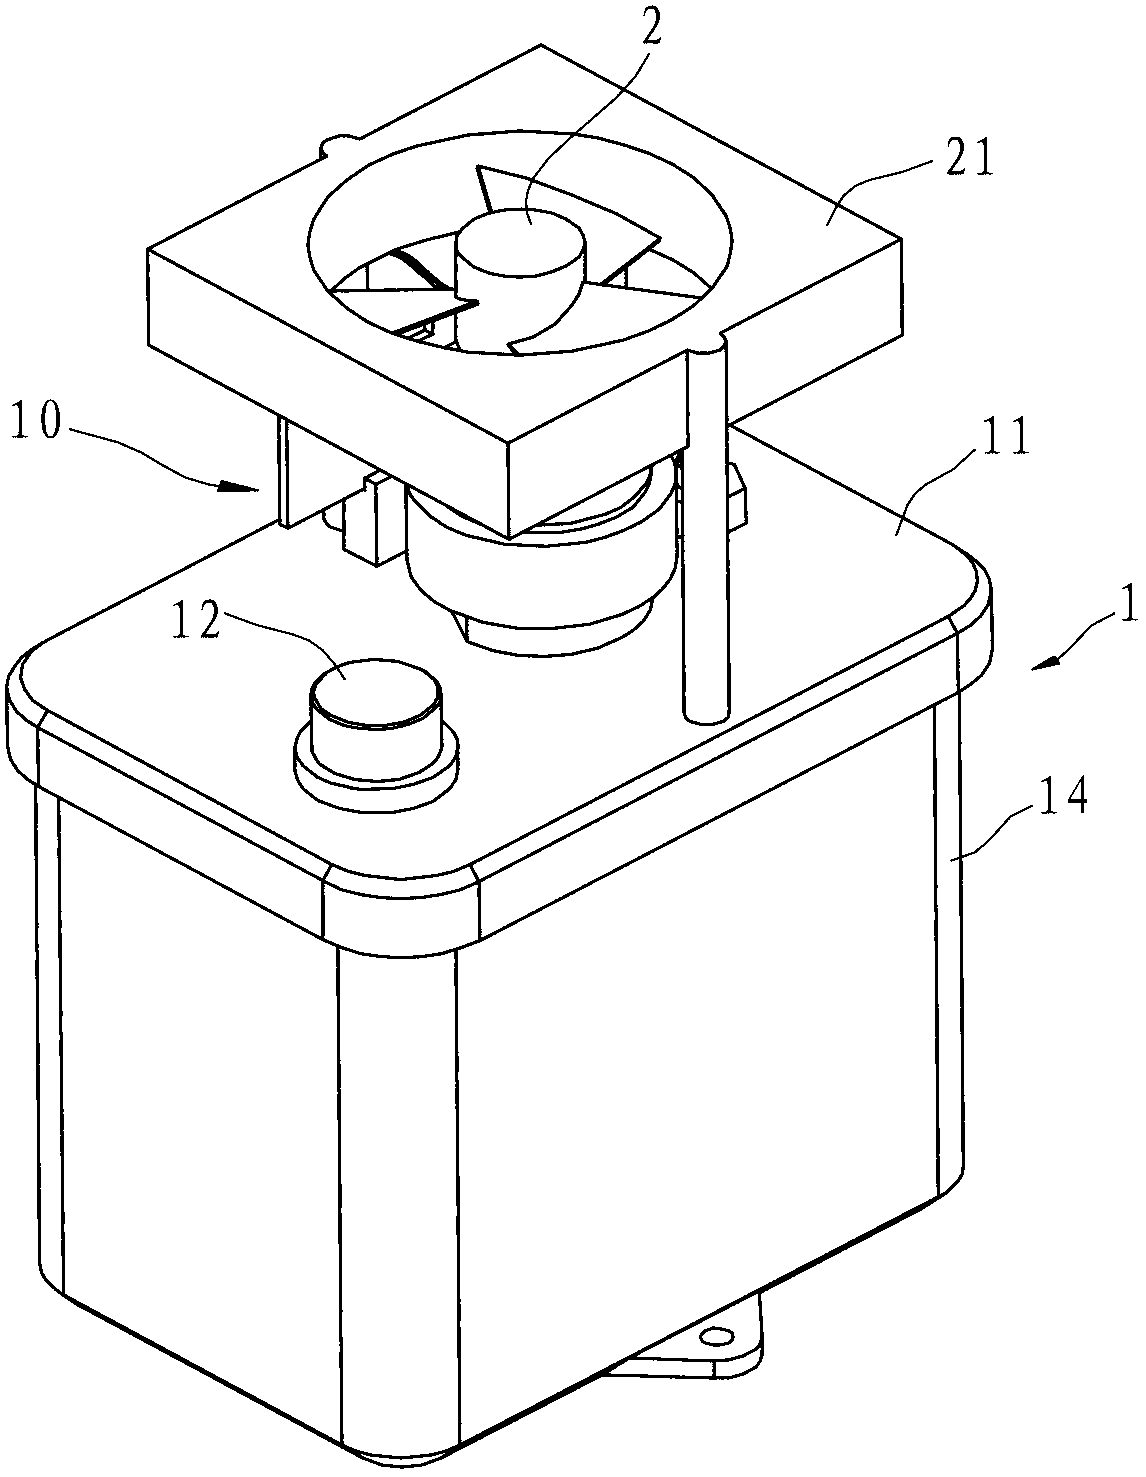 Aromatherapy essential oil catalytic burner and catalytic unit applying same